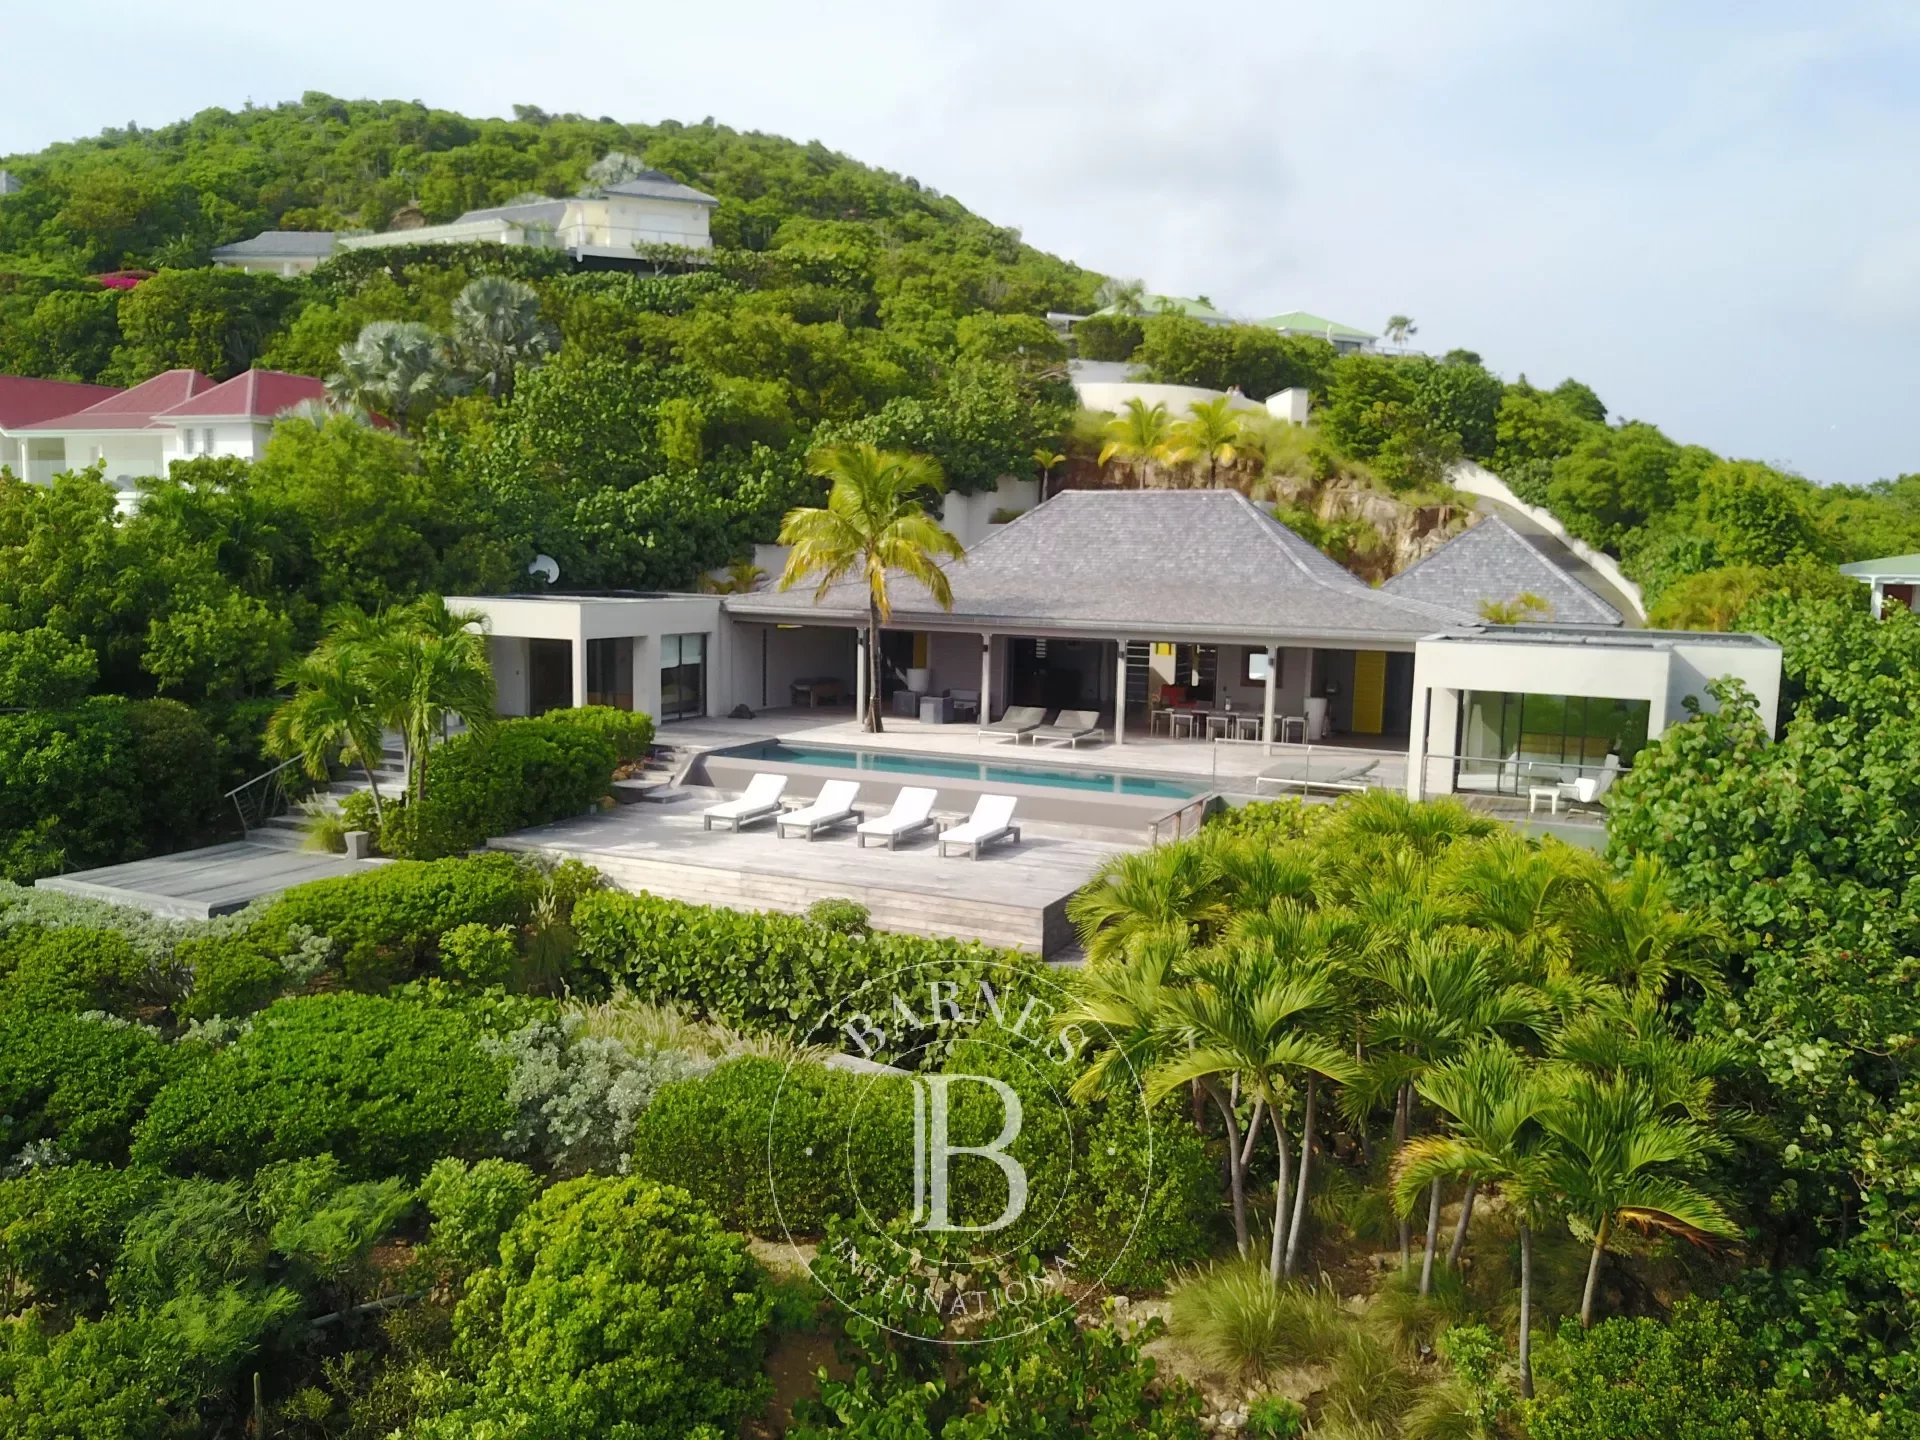 4 -Bedroom Villa in St.Barths - picture 11 title=